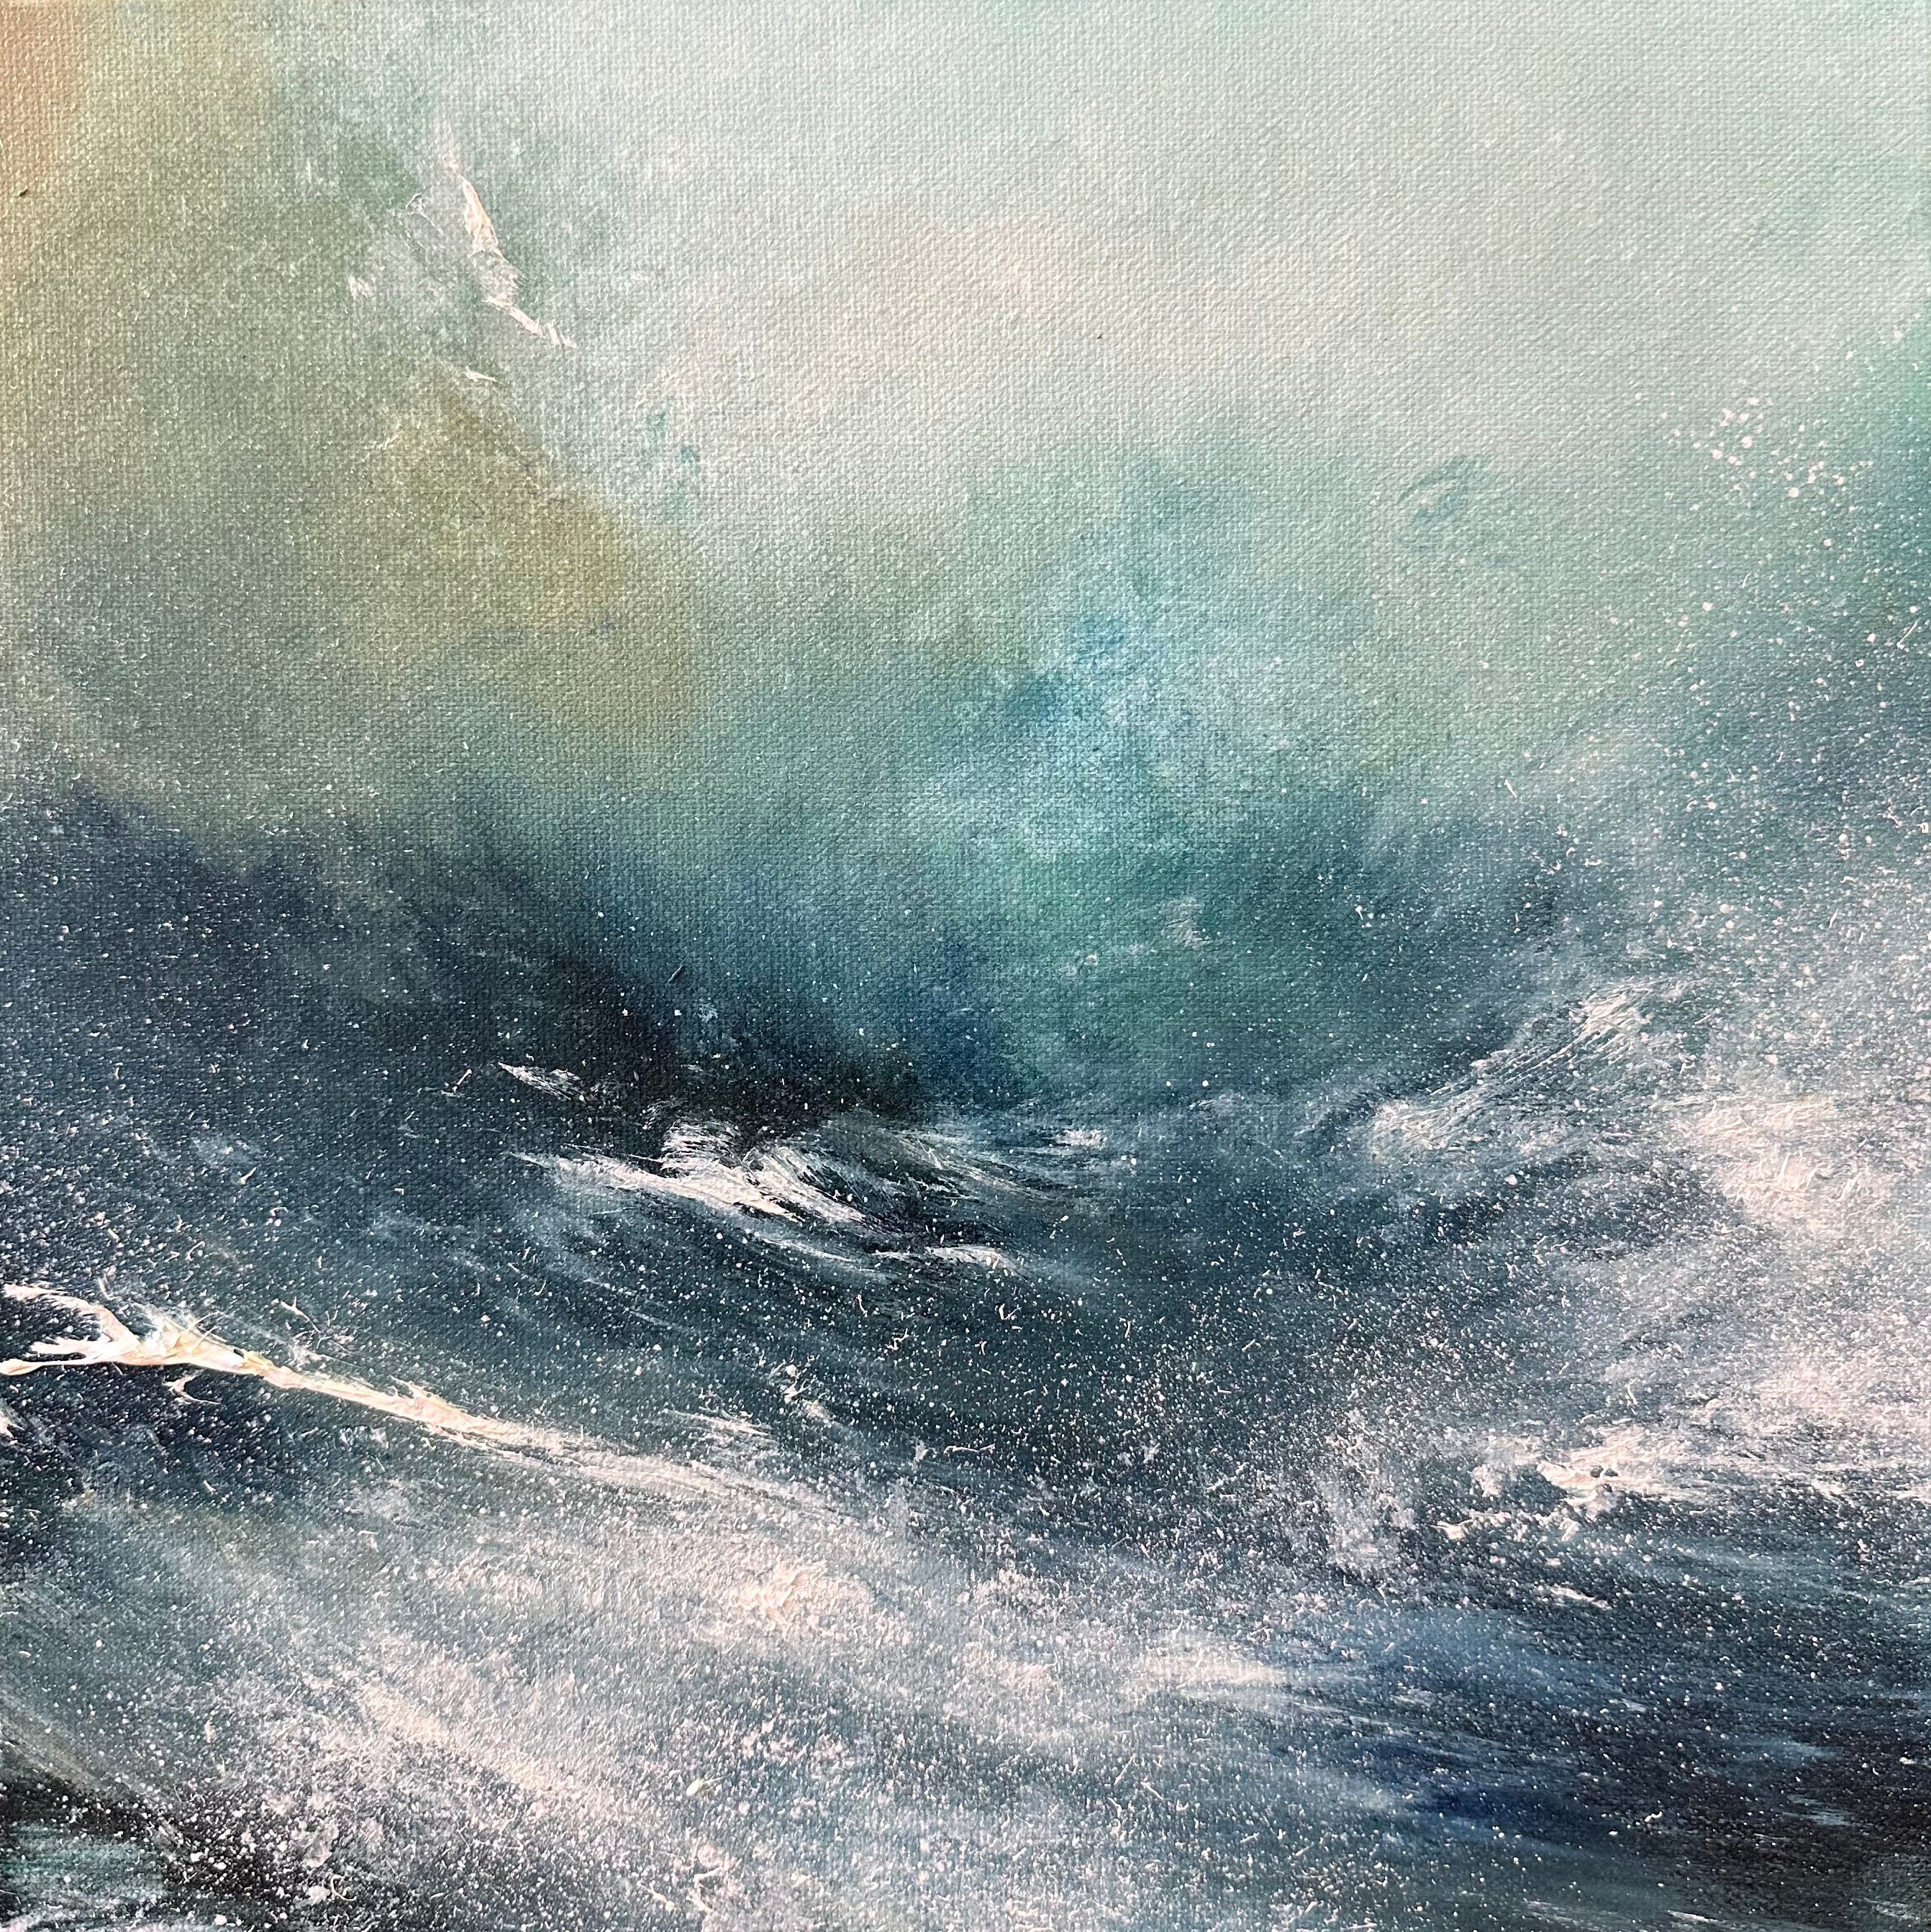 Oil on canvas by Mark Stopforth. Available from the Point Contemporary Art Gallery in Cromer, Norfolk UK. Wildseas